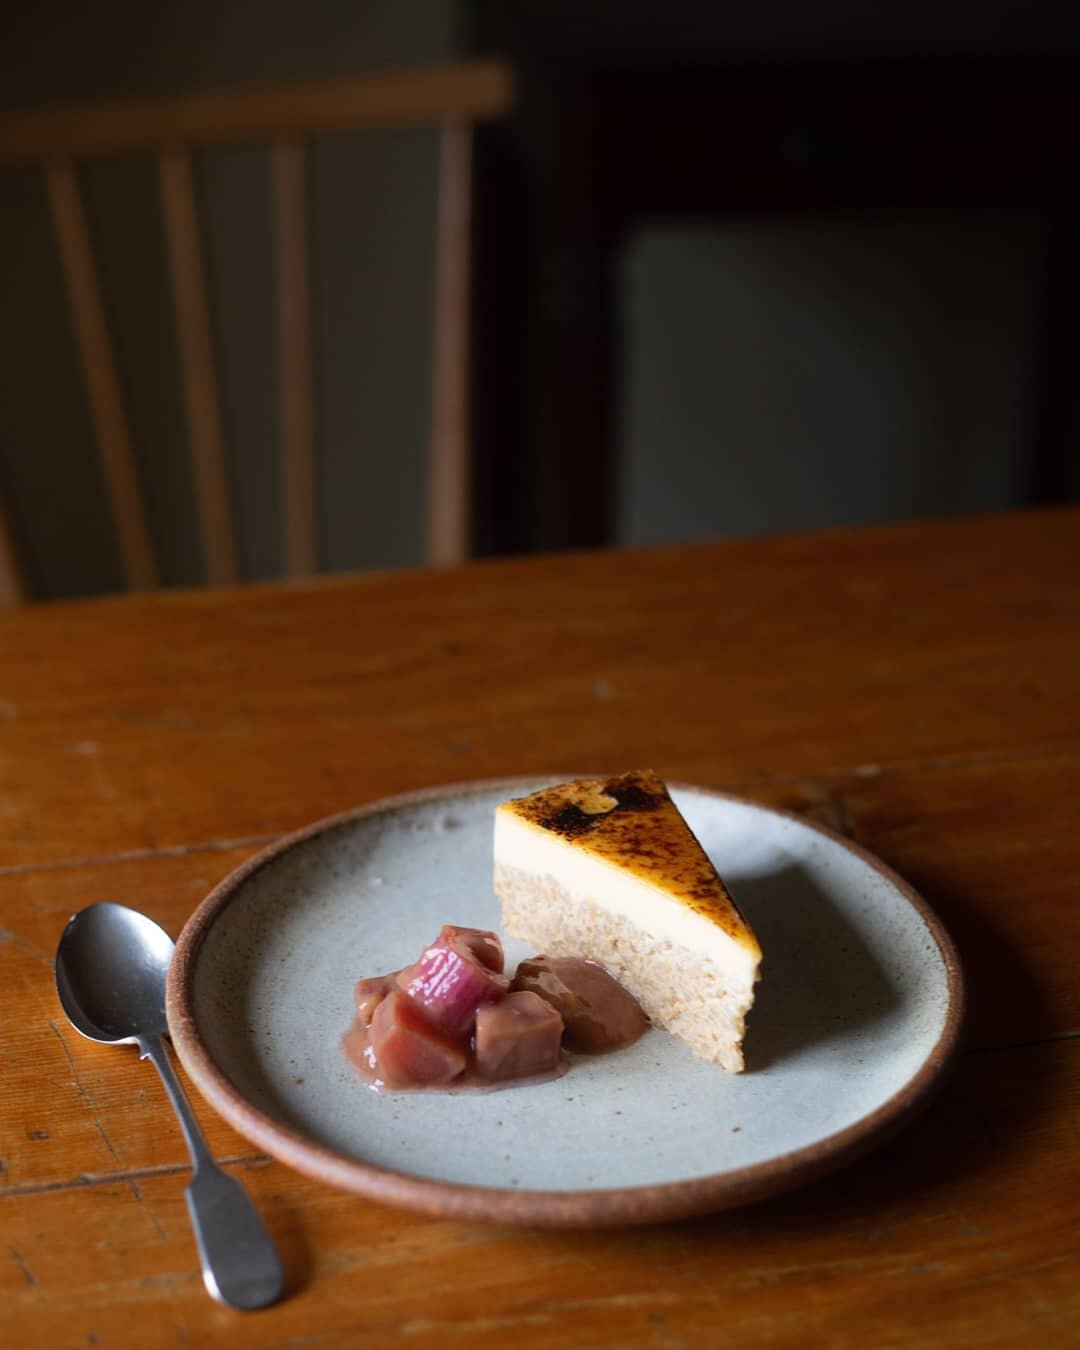 Baked rice custard and poached rhubarb. Inspired by a Tuscan favourite called Torte di Riso. Each bite is reminiscent of Cr&egrave;me Caramel and rice pudding at the same time. A fine combination indeed. Rhubarb picked from a very friendly neighbour.